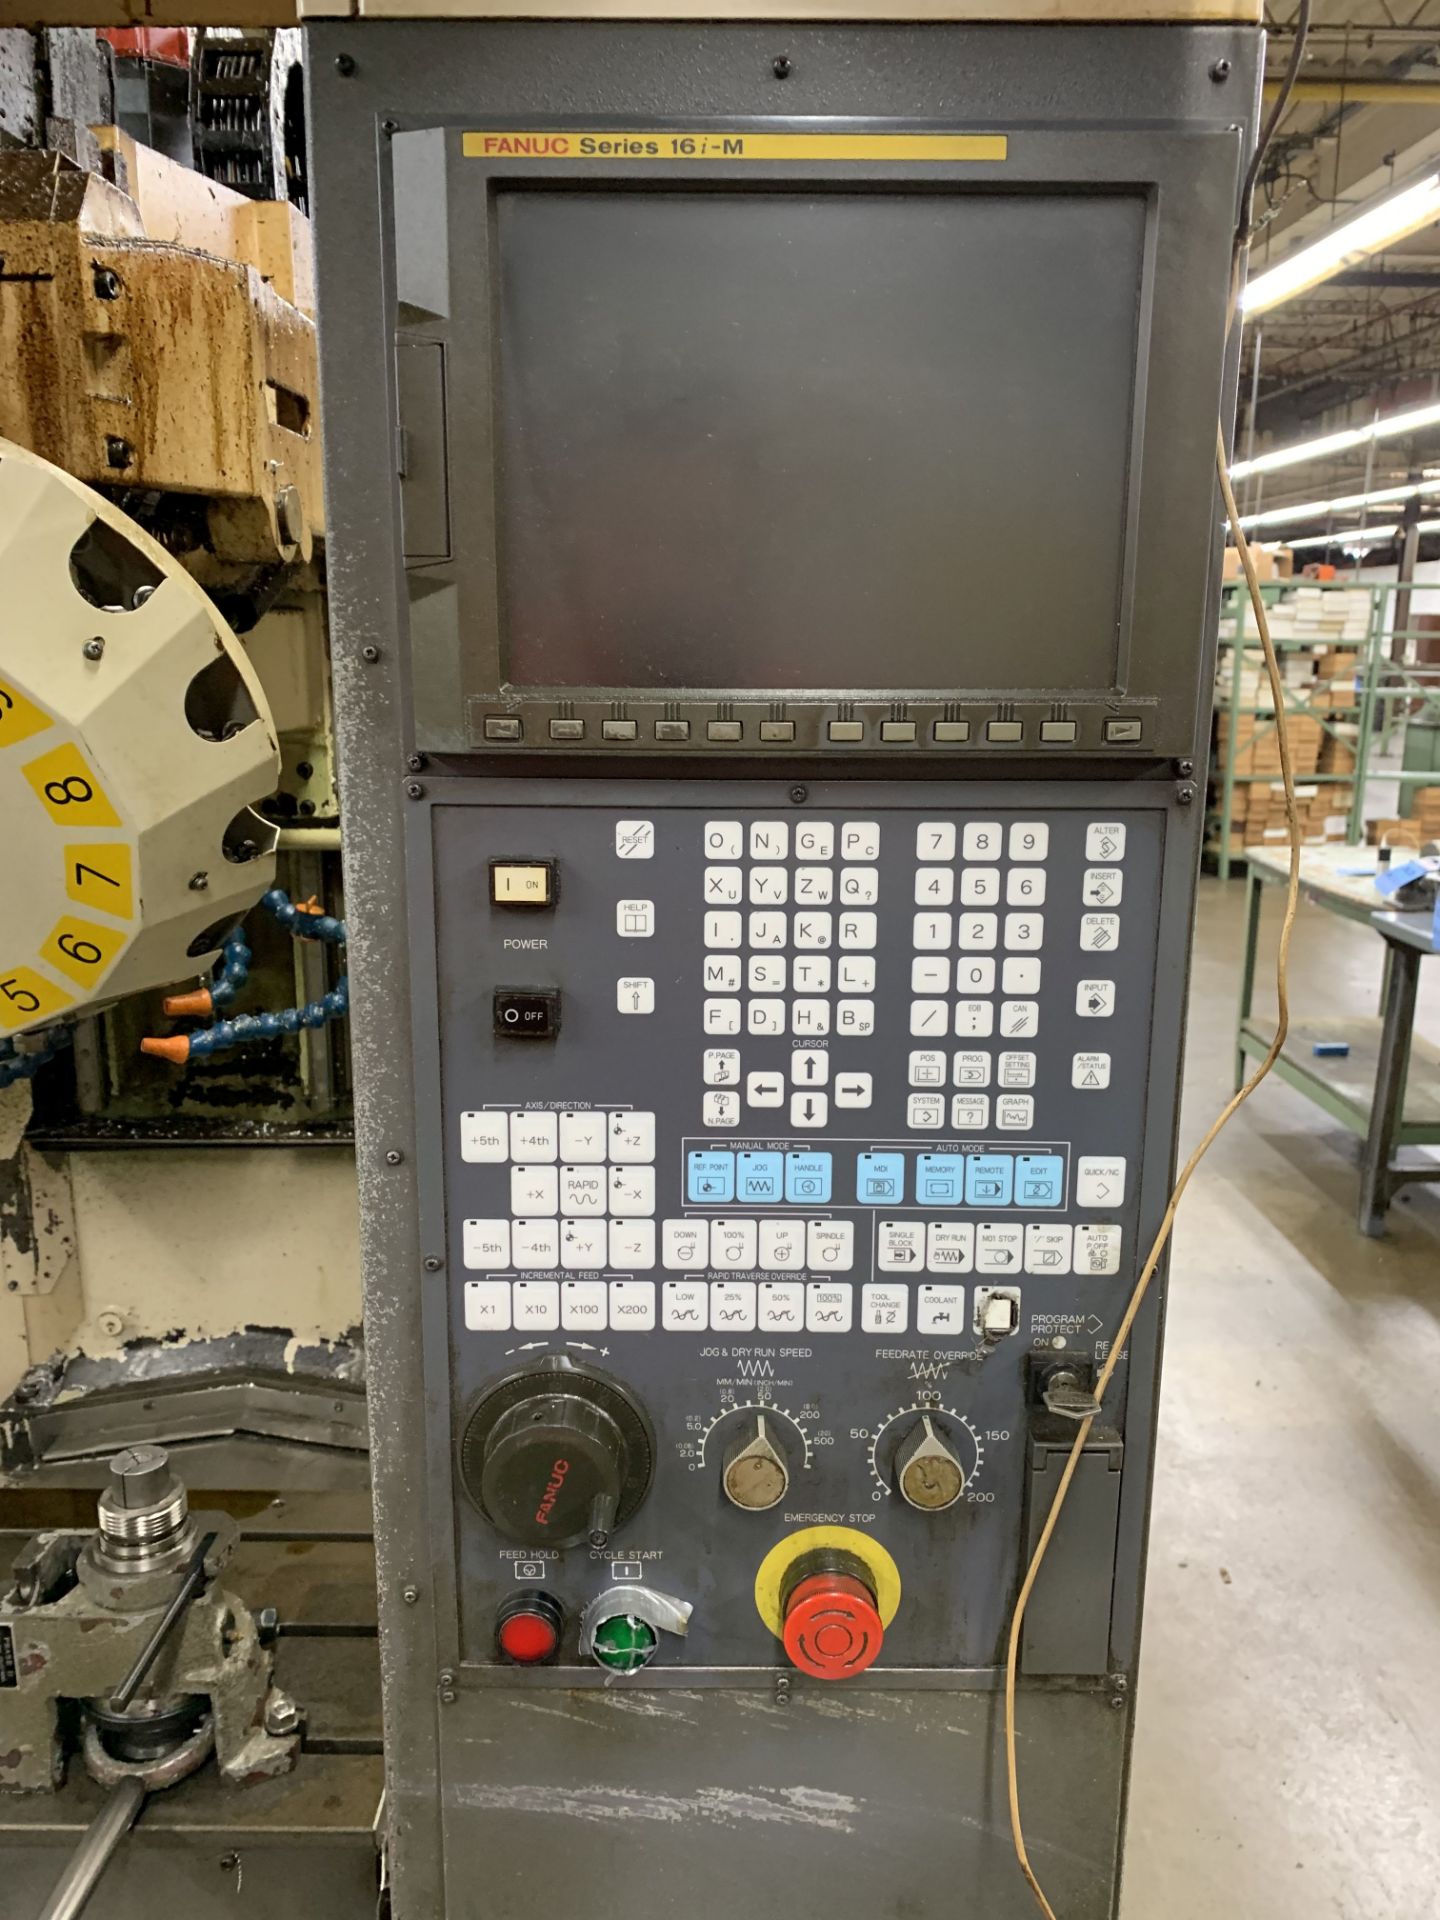 FANUC MODEL ROBODRILL ALPHA T14iB CNC DRILL AND TAPPING CENTER; S/N P014TL112, FANUC 16i-M - Image 5 of 9